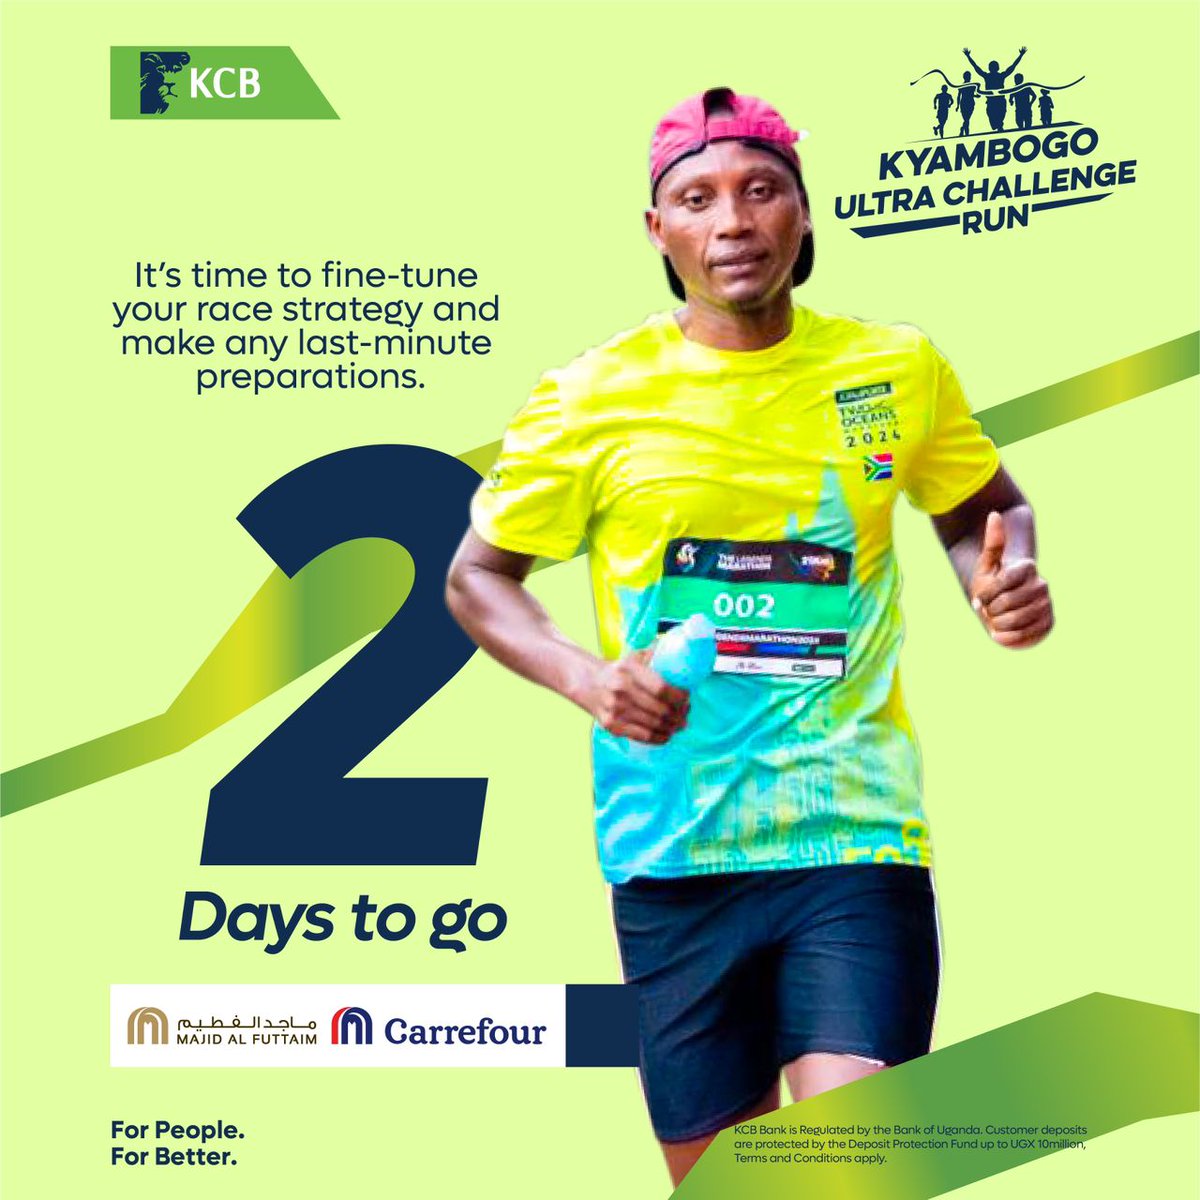 0⃣2⃣ DAYS TO GO: Fuel your body; Yes it's time to start carbo loading, eat lots of whole grains, fruits, and vegetables. Most importantly, hydration, hydration, hydration, this should be the plan. 🔛🔛#KyambogoUltraChallengeRun